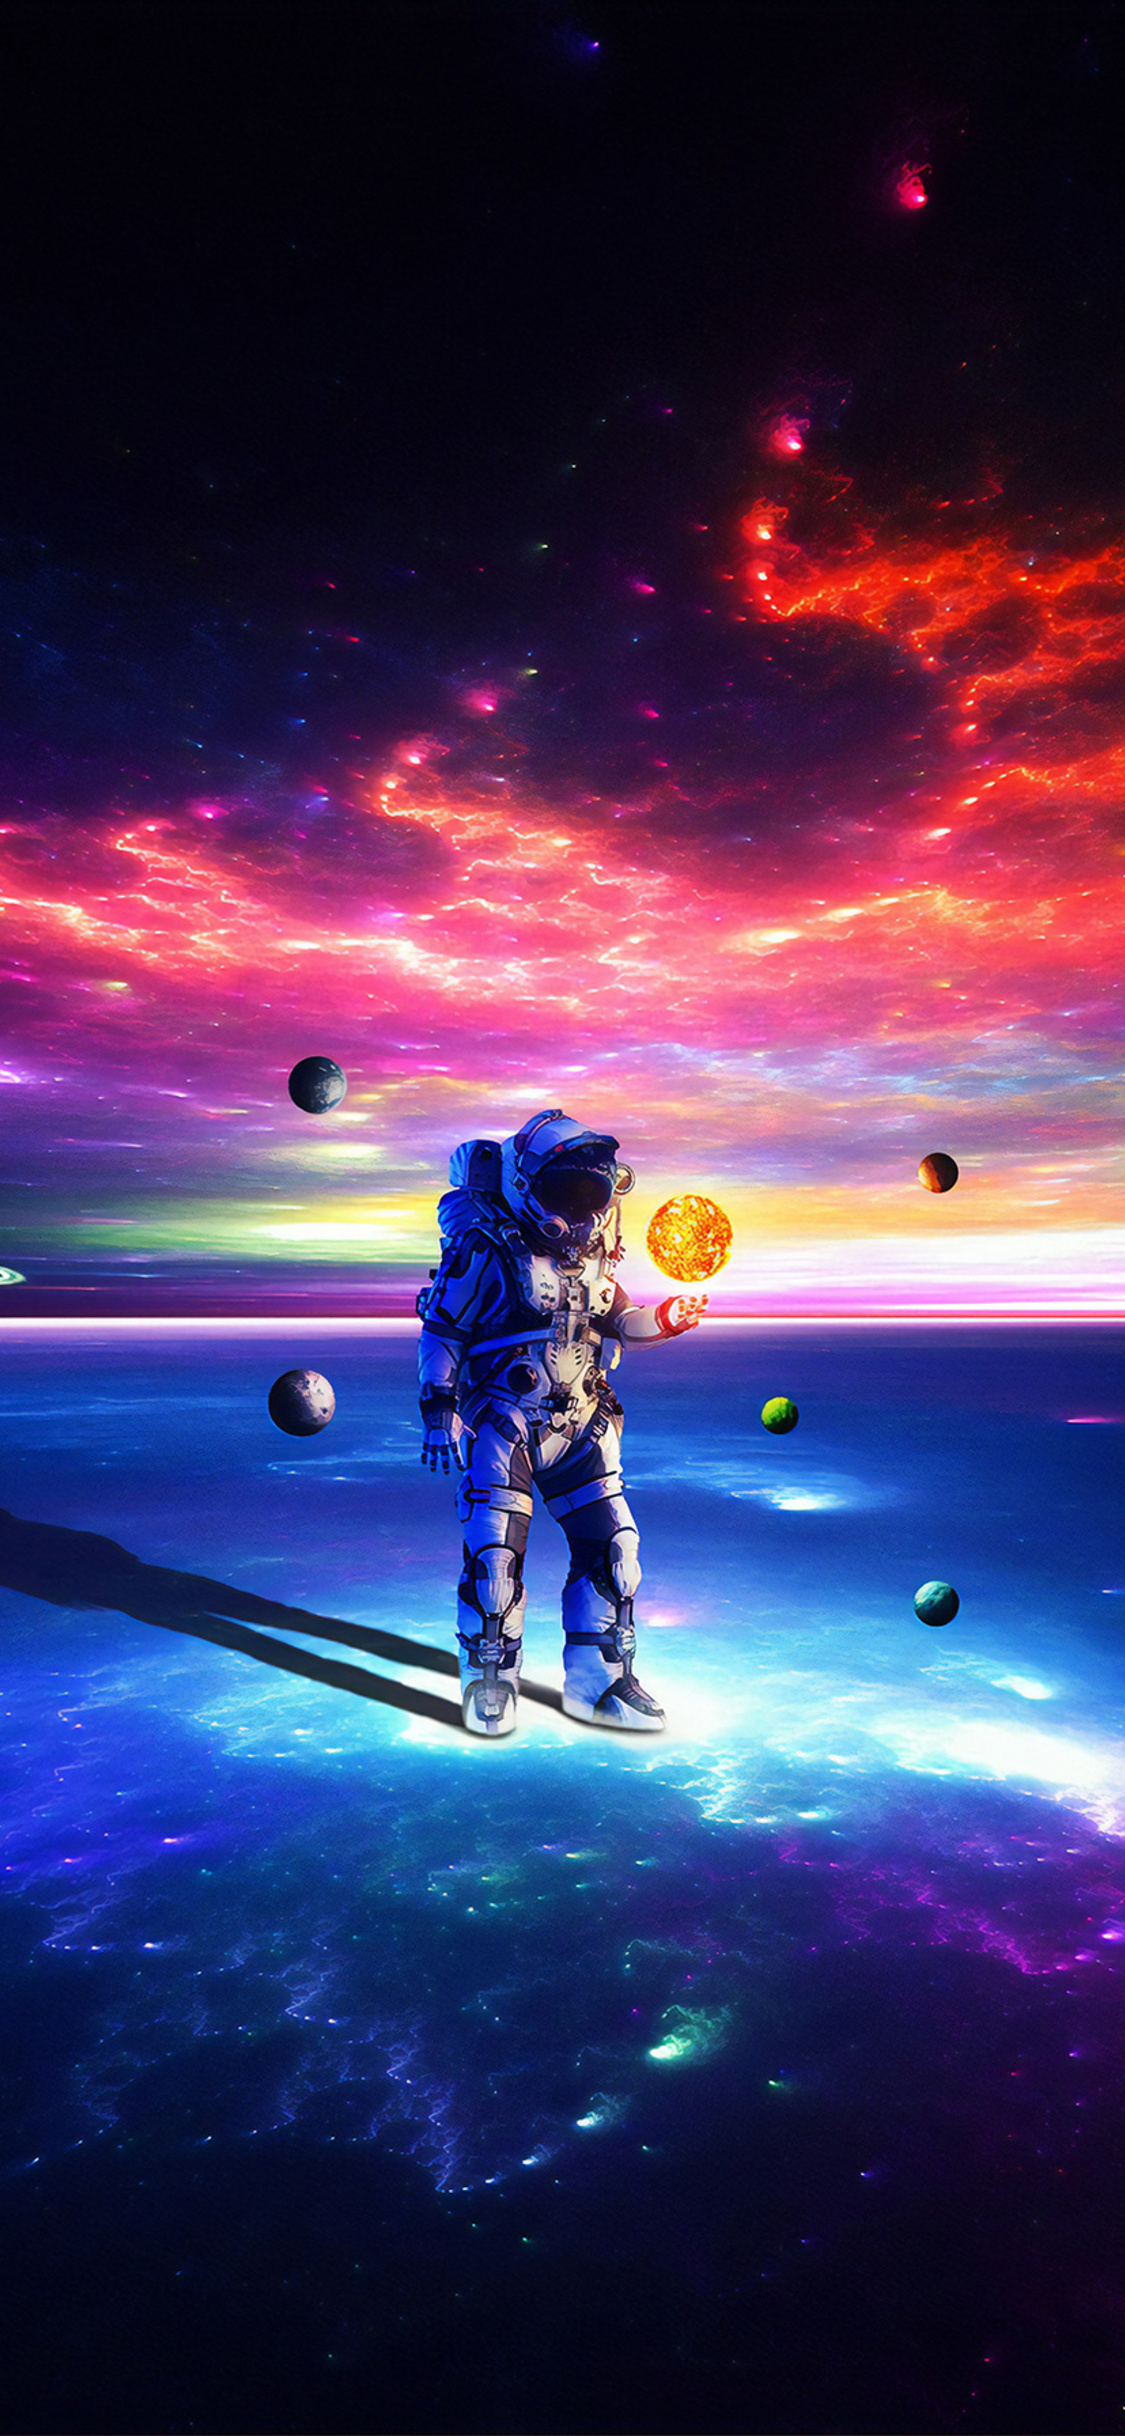 X lost alone astronaut iphone xsiphone iphone x hd k wallpapers images backgrounds photos and pictures